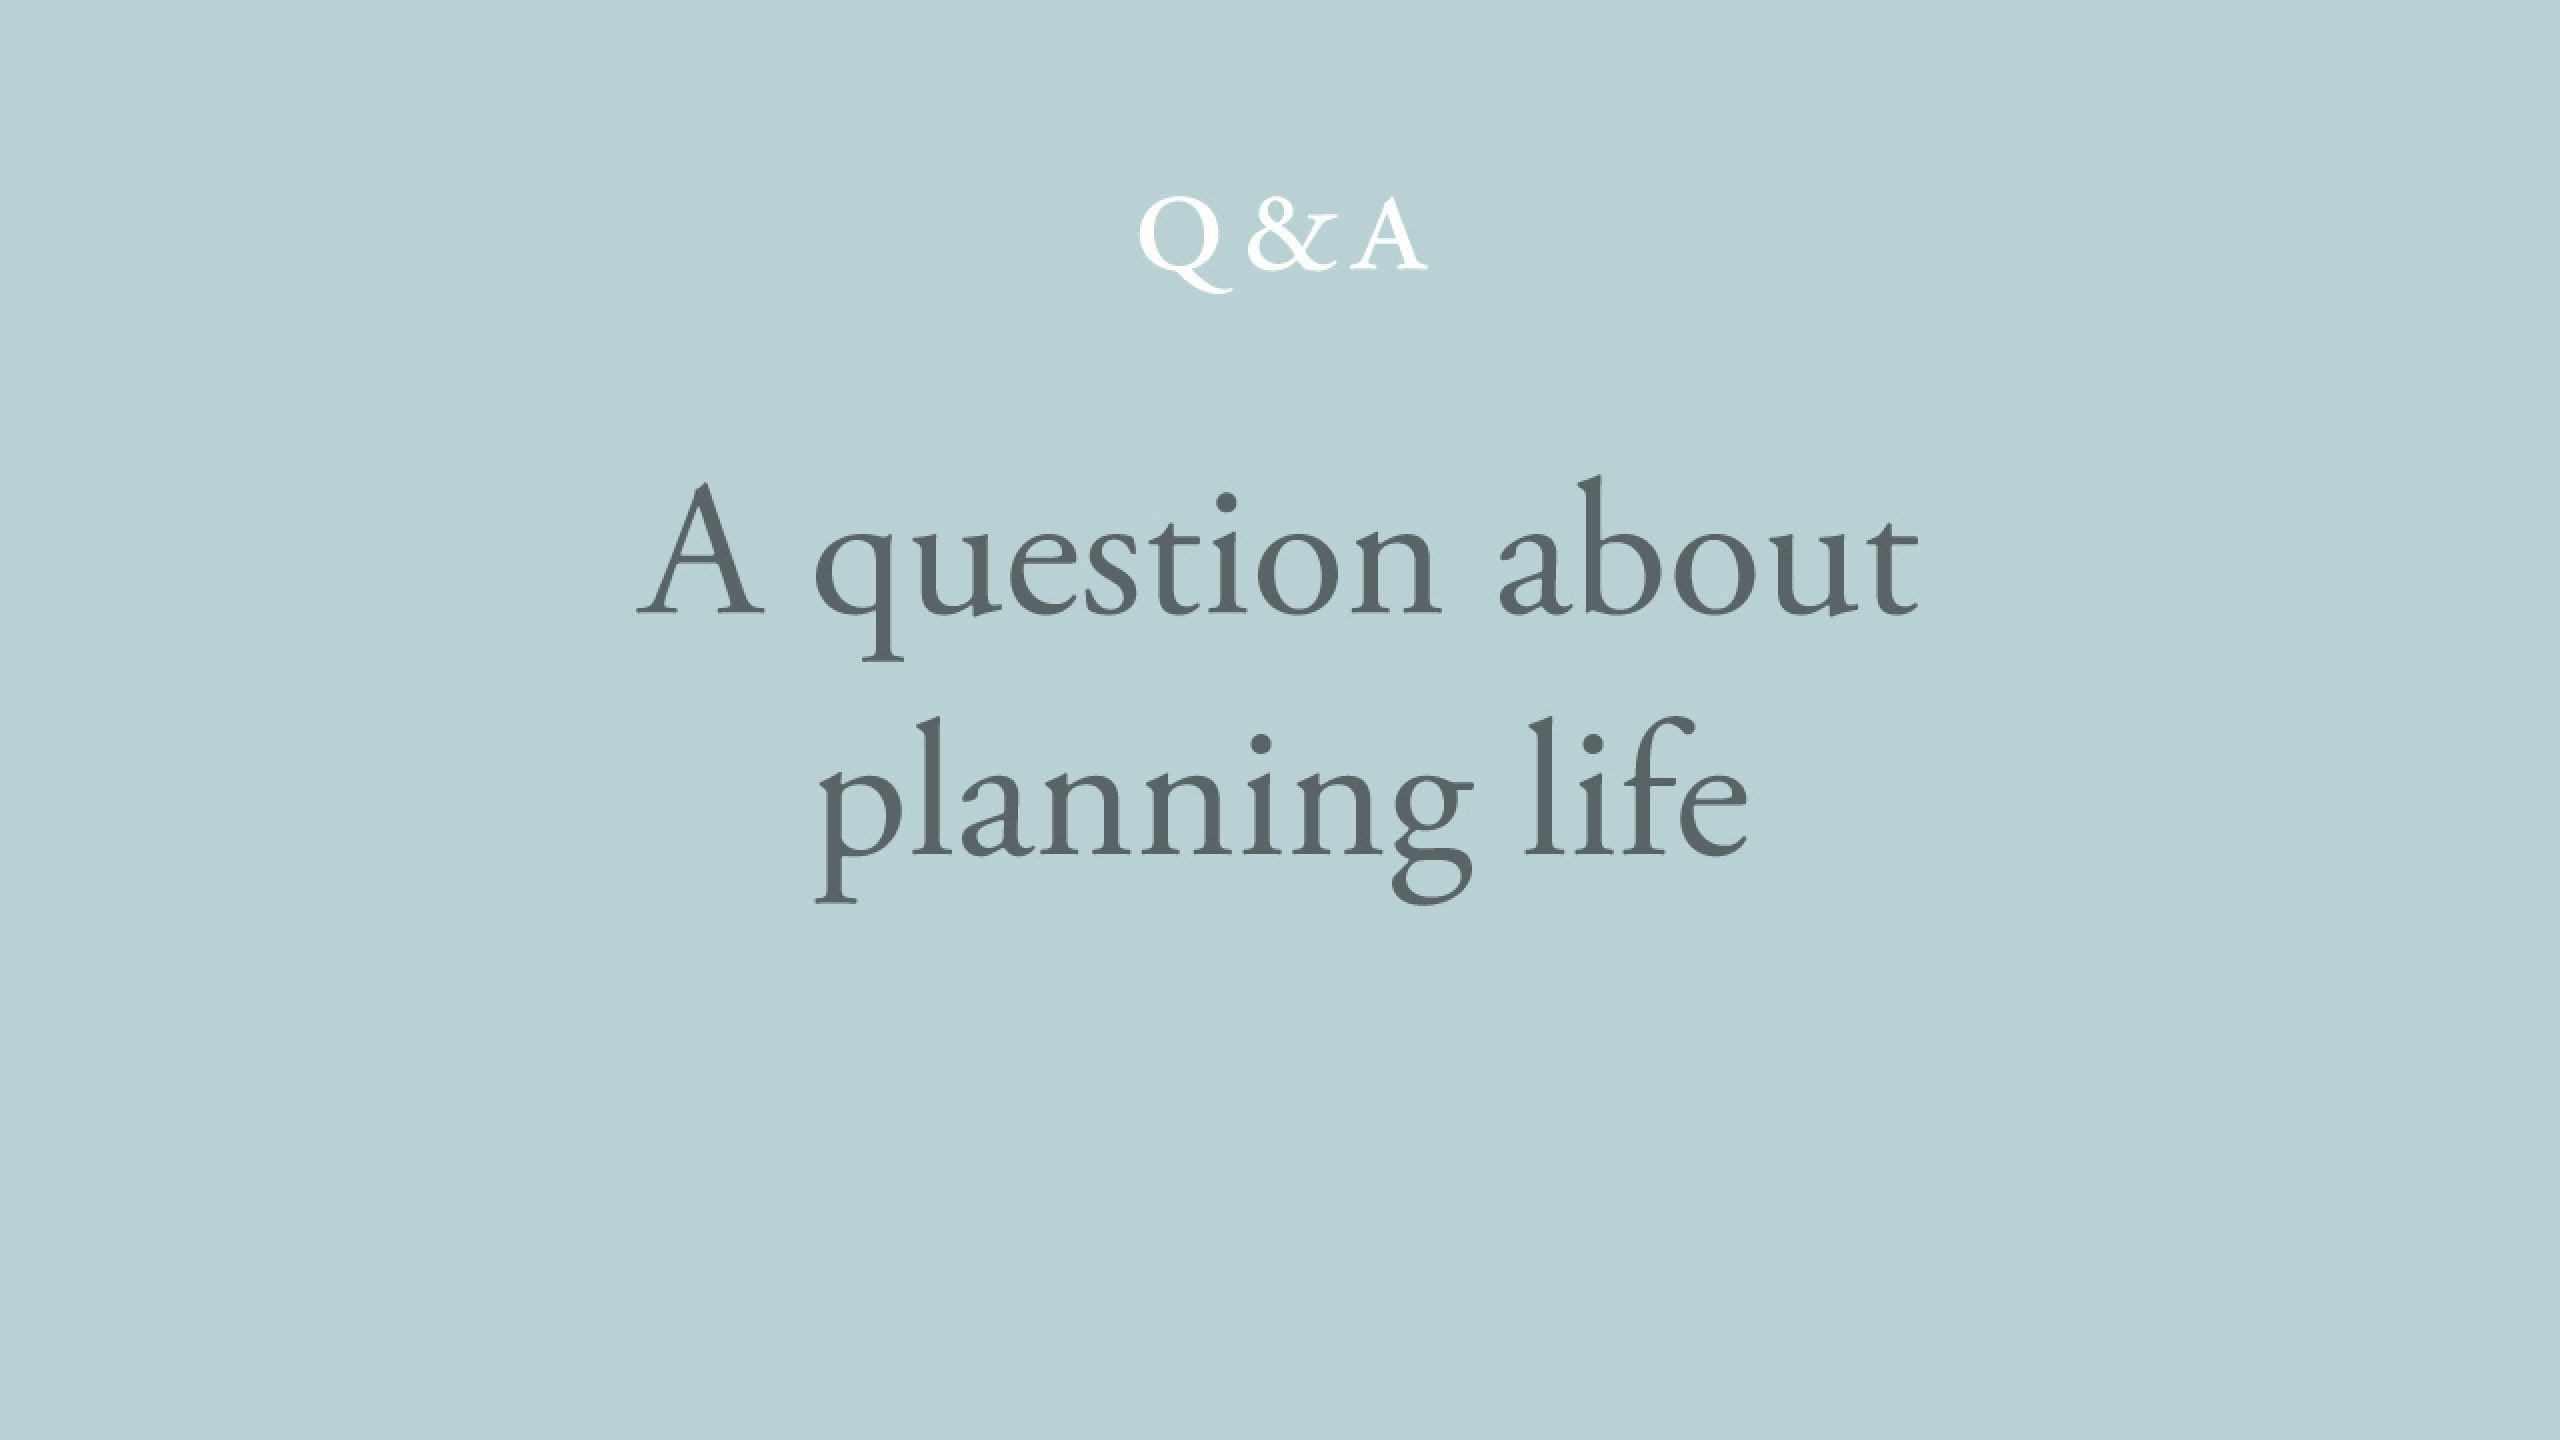 Is there a point in planning any part of life?